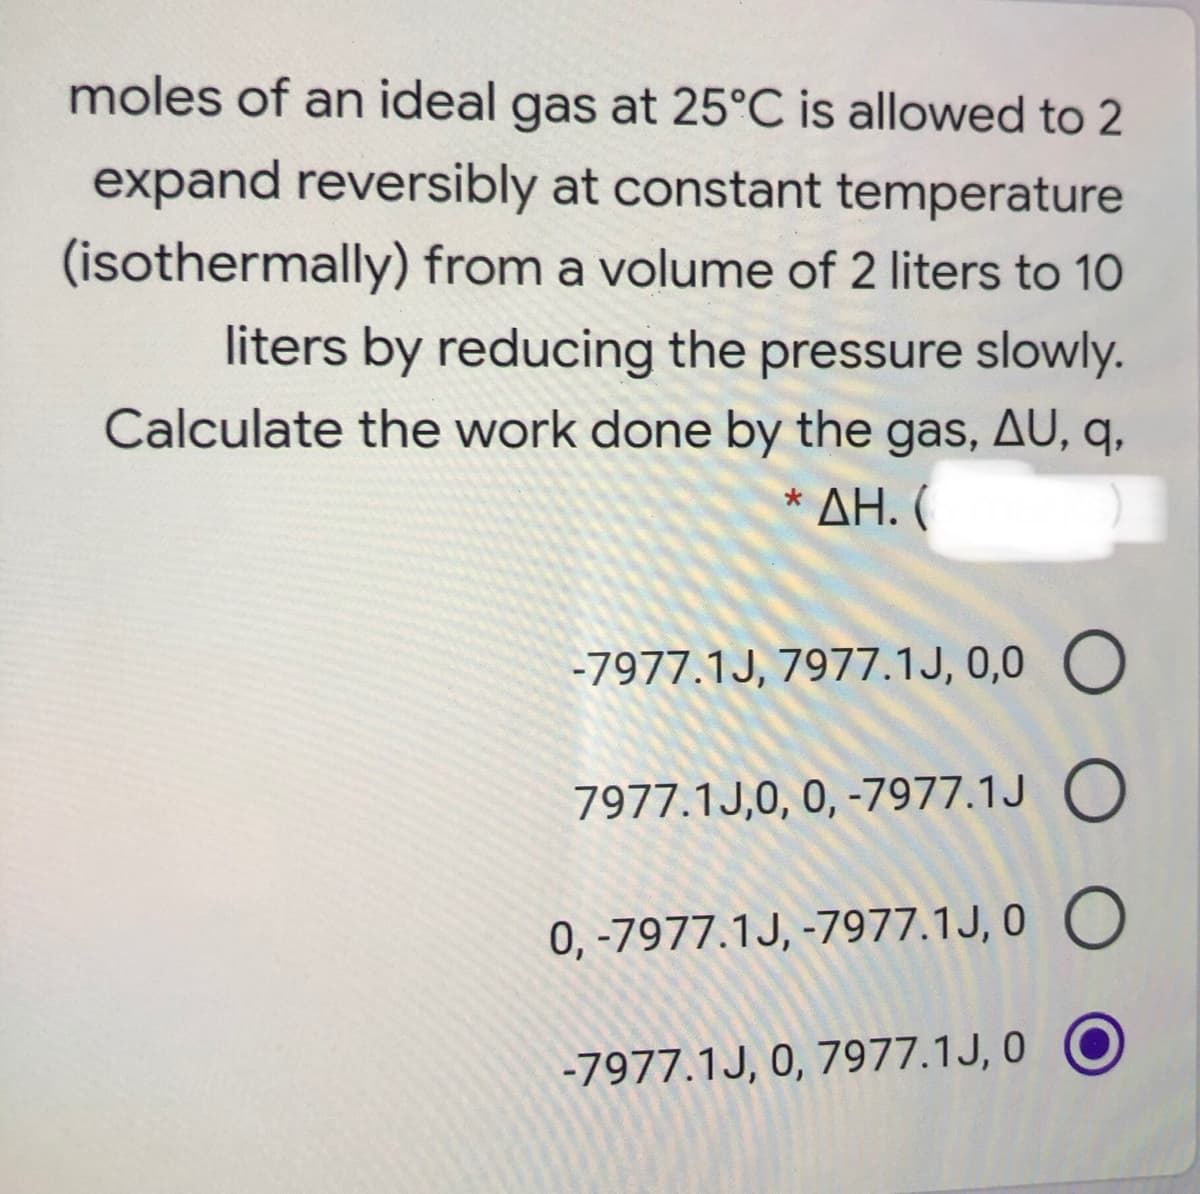 moles of an ideal gas at 25°C is allowed to 2
expand reversibly at constant temperature
(isothermally) from a volume of 2 liters to 10
liters by reducing the pressure slowly.
Calculate the work done by the gas, AU, q,
* ΔΗ. (
-7977.1J, 7977.1J, 0,0 O
7977.1J,0, 0, -7977.1J O
0, -7977.1J, -7977.1J, 0 O
-7977.1J, 0, 7977.1J, 0 O
